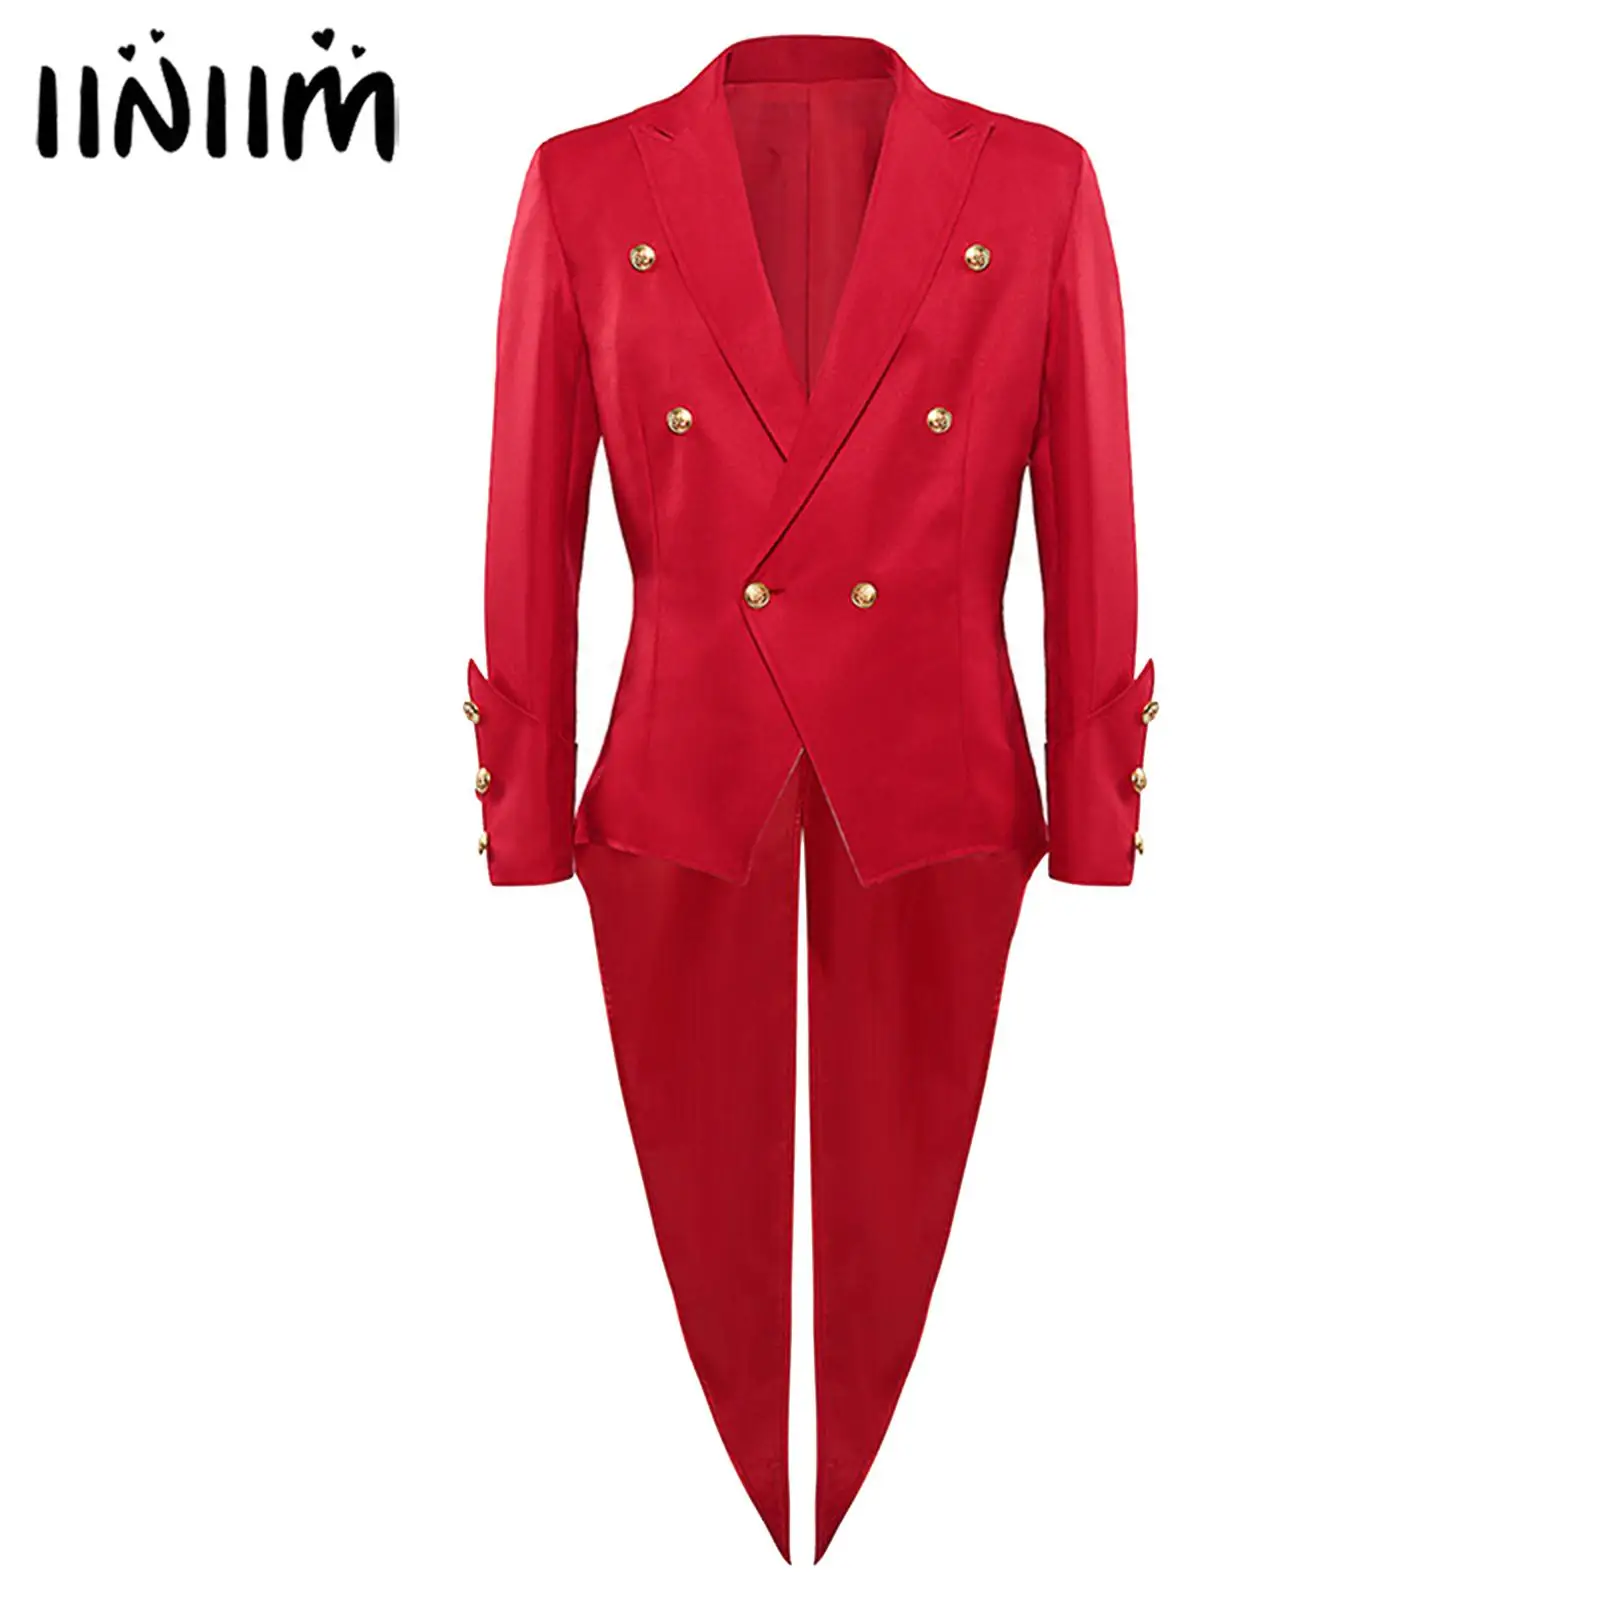 Mens Medieval Vintage Tuxedo Cosplay Costume Peaked Lapel Retro Buttons Tailcoat Blazer for Dress-Up Masquerade Halloween Outfit